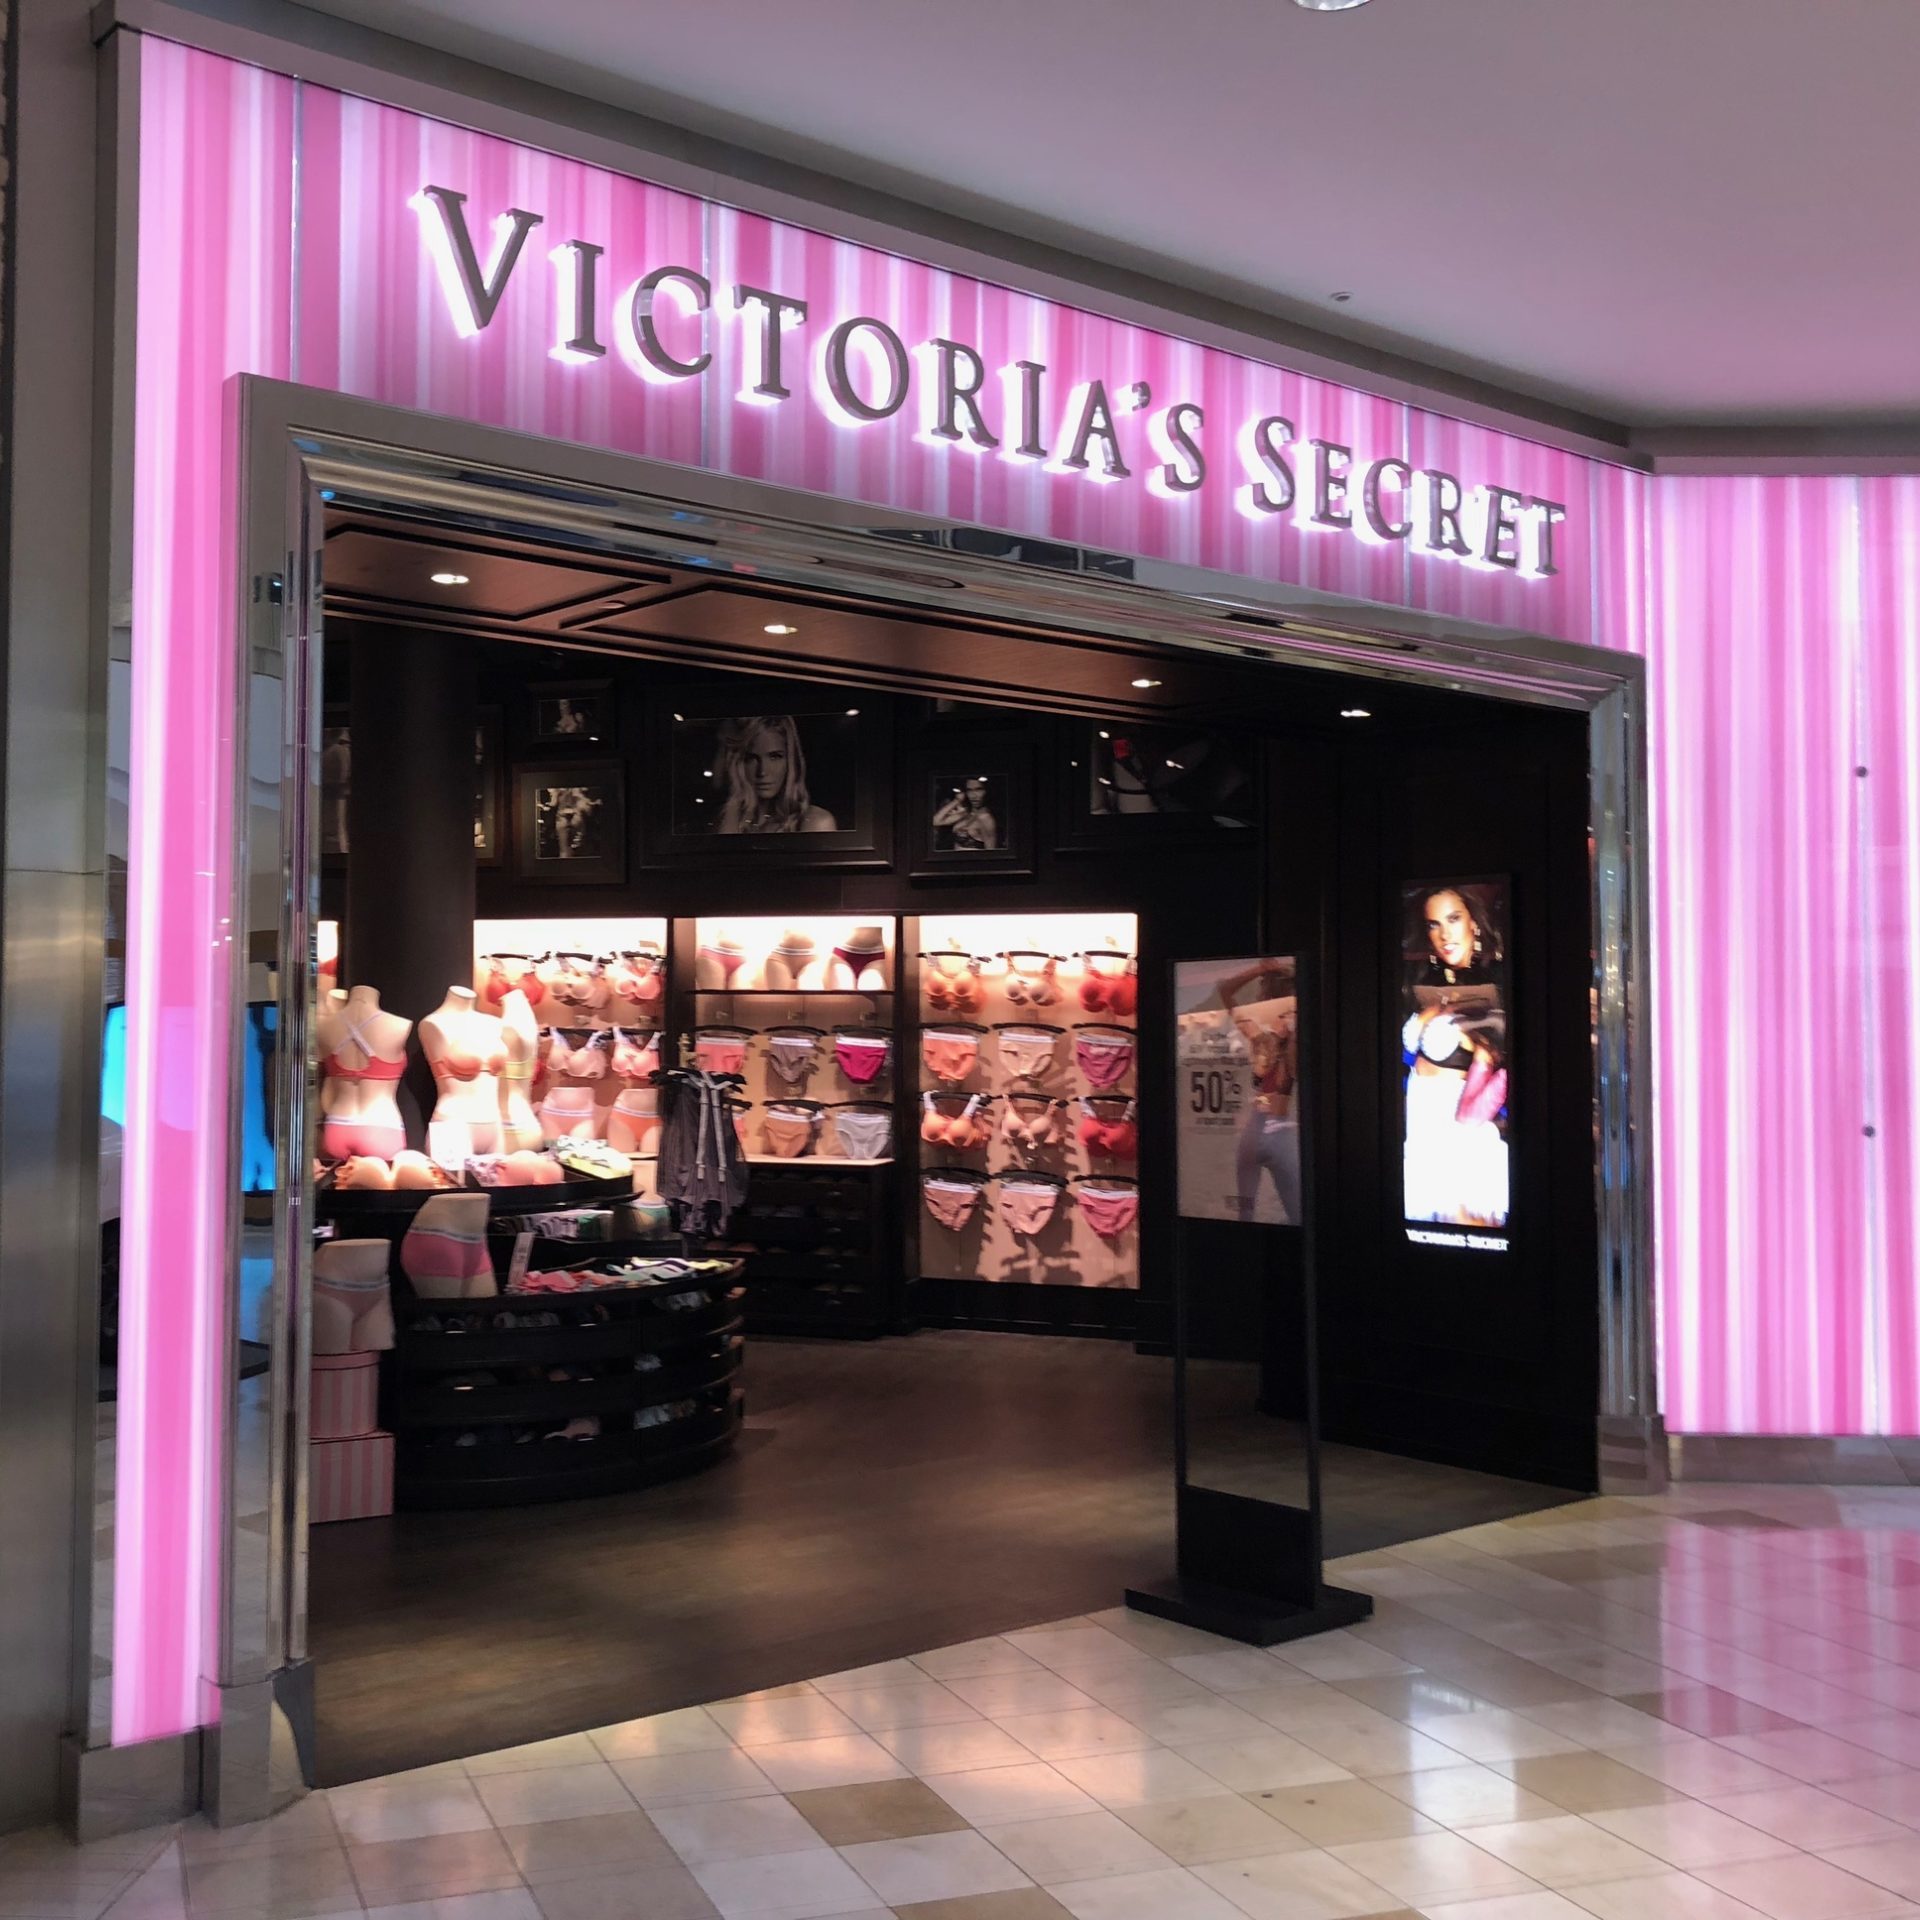 Victoria's Secret: Find deals from $3 during the Semi-Annual sale